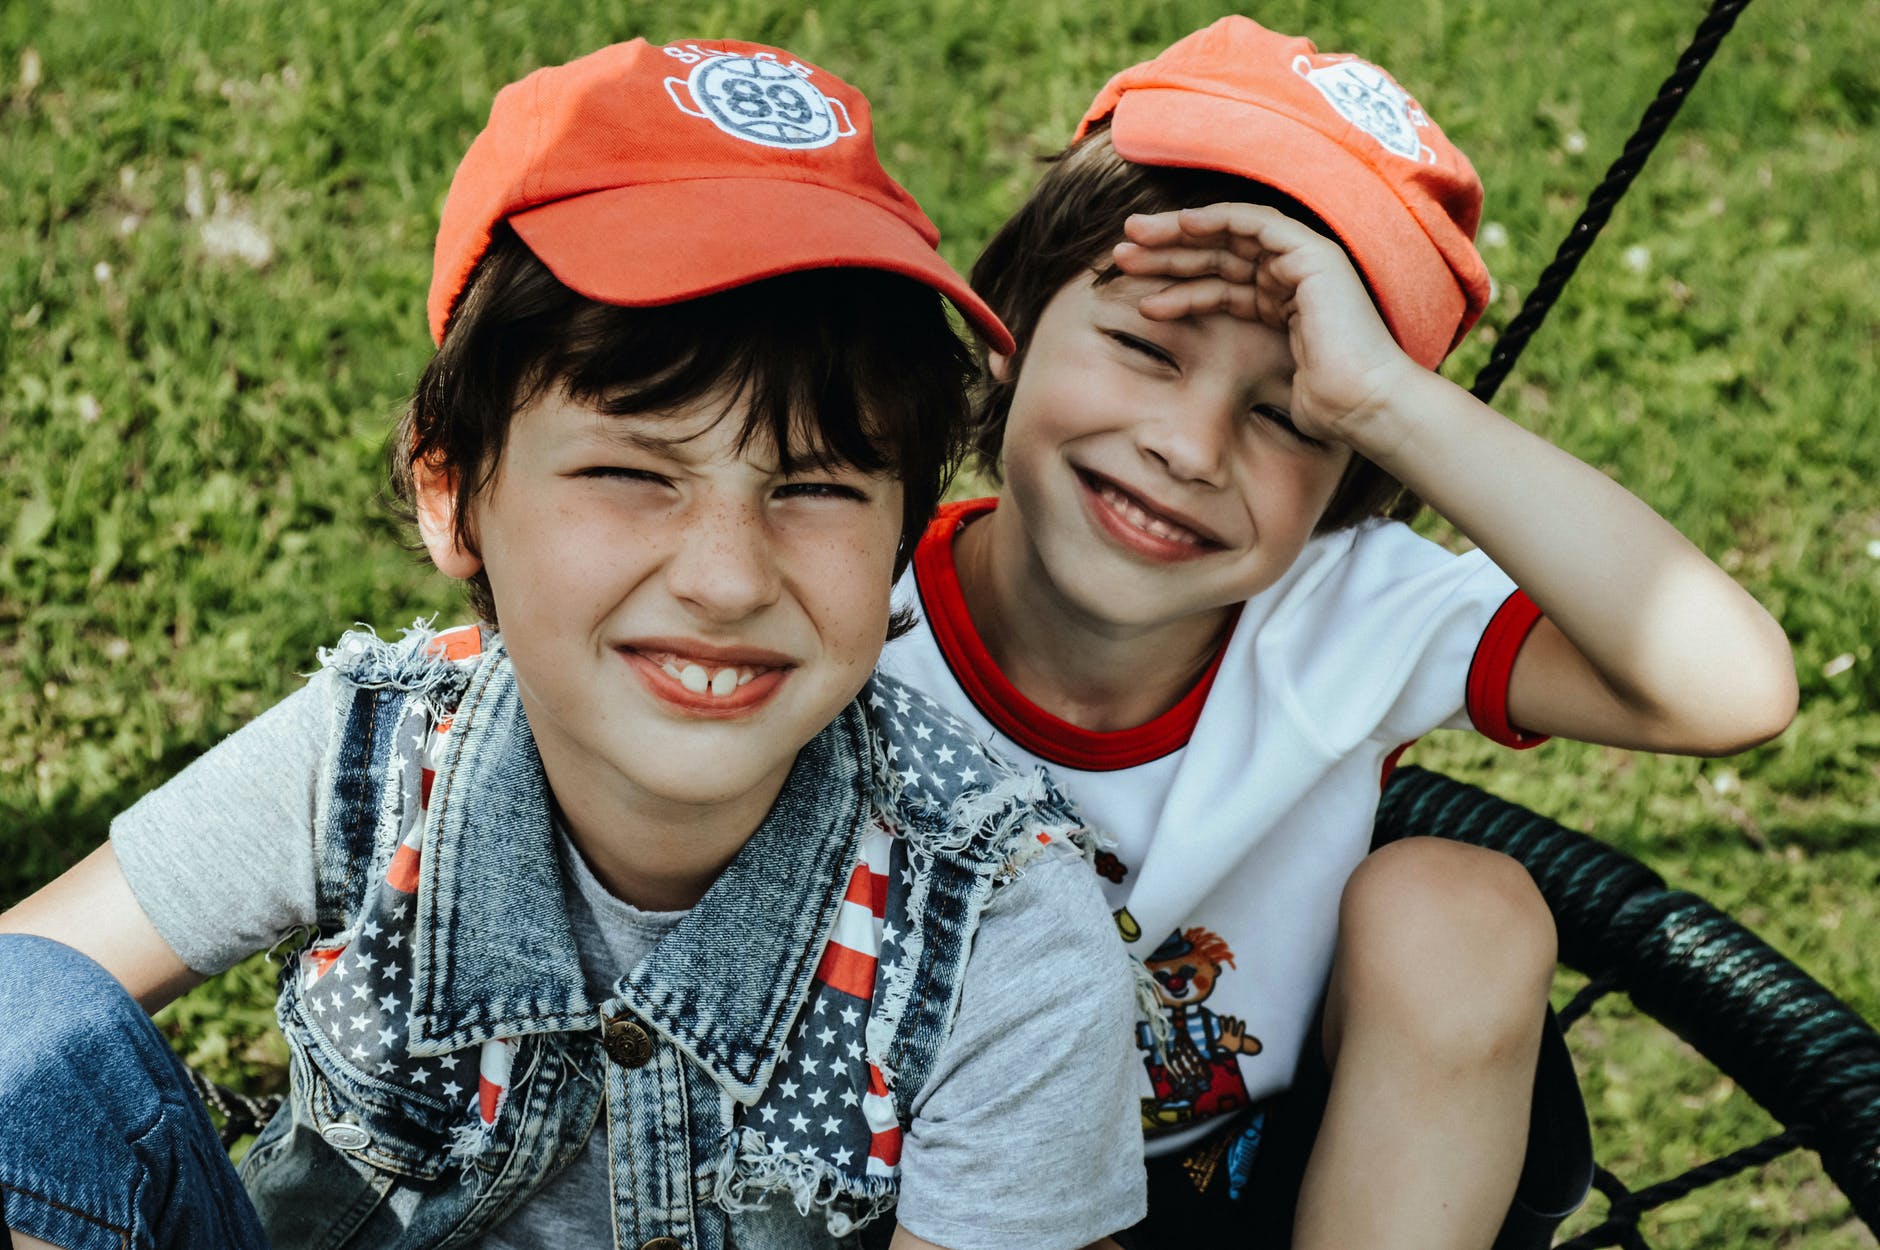 The twins became best friends. | Source: Pexels